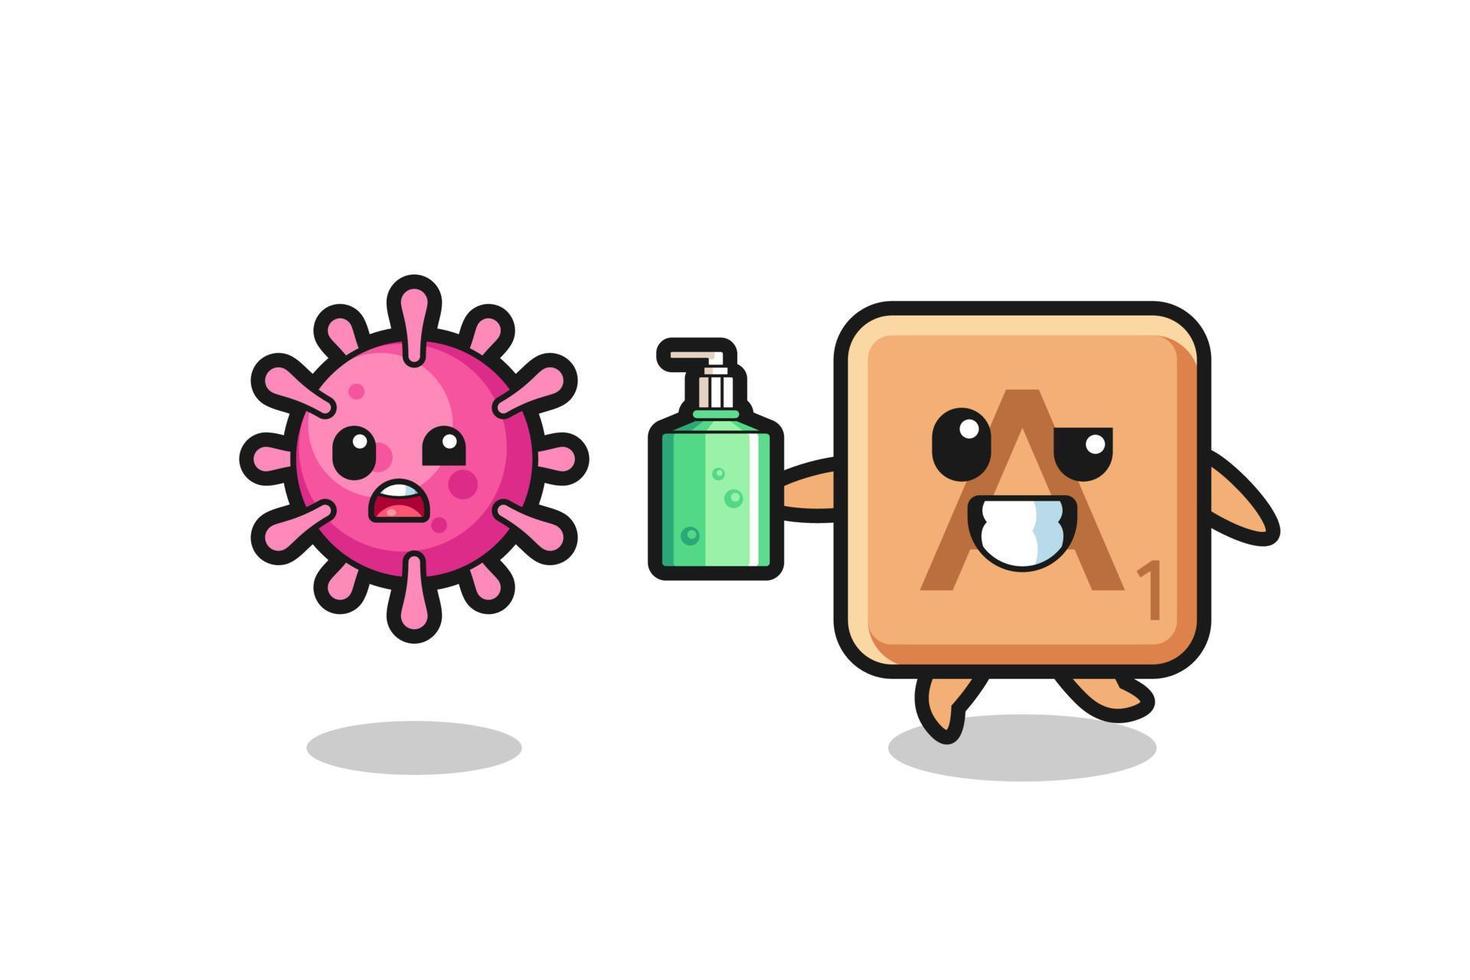 illustration of scrabble character chasing evil virus with hand sanitizer vector